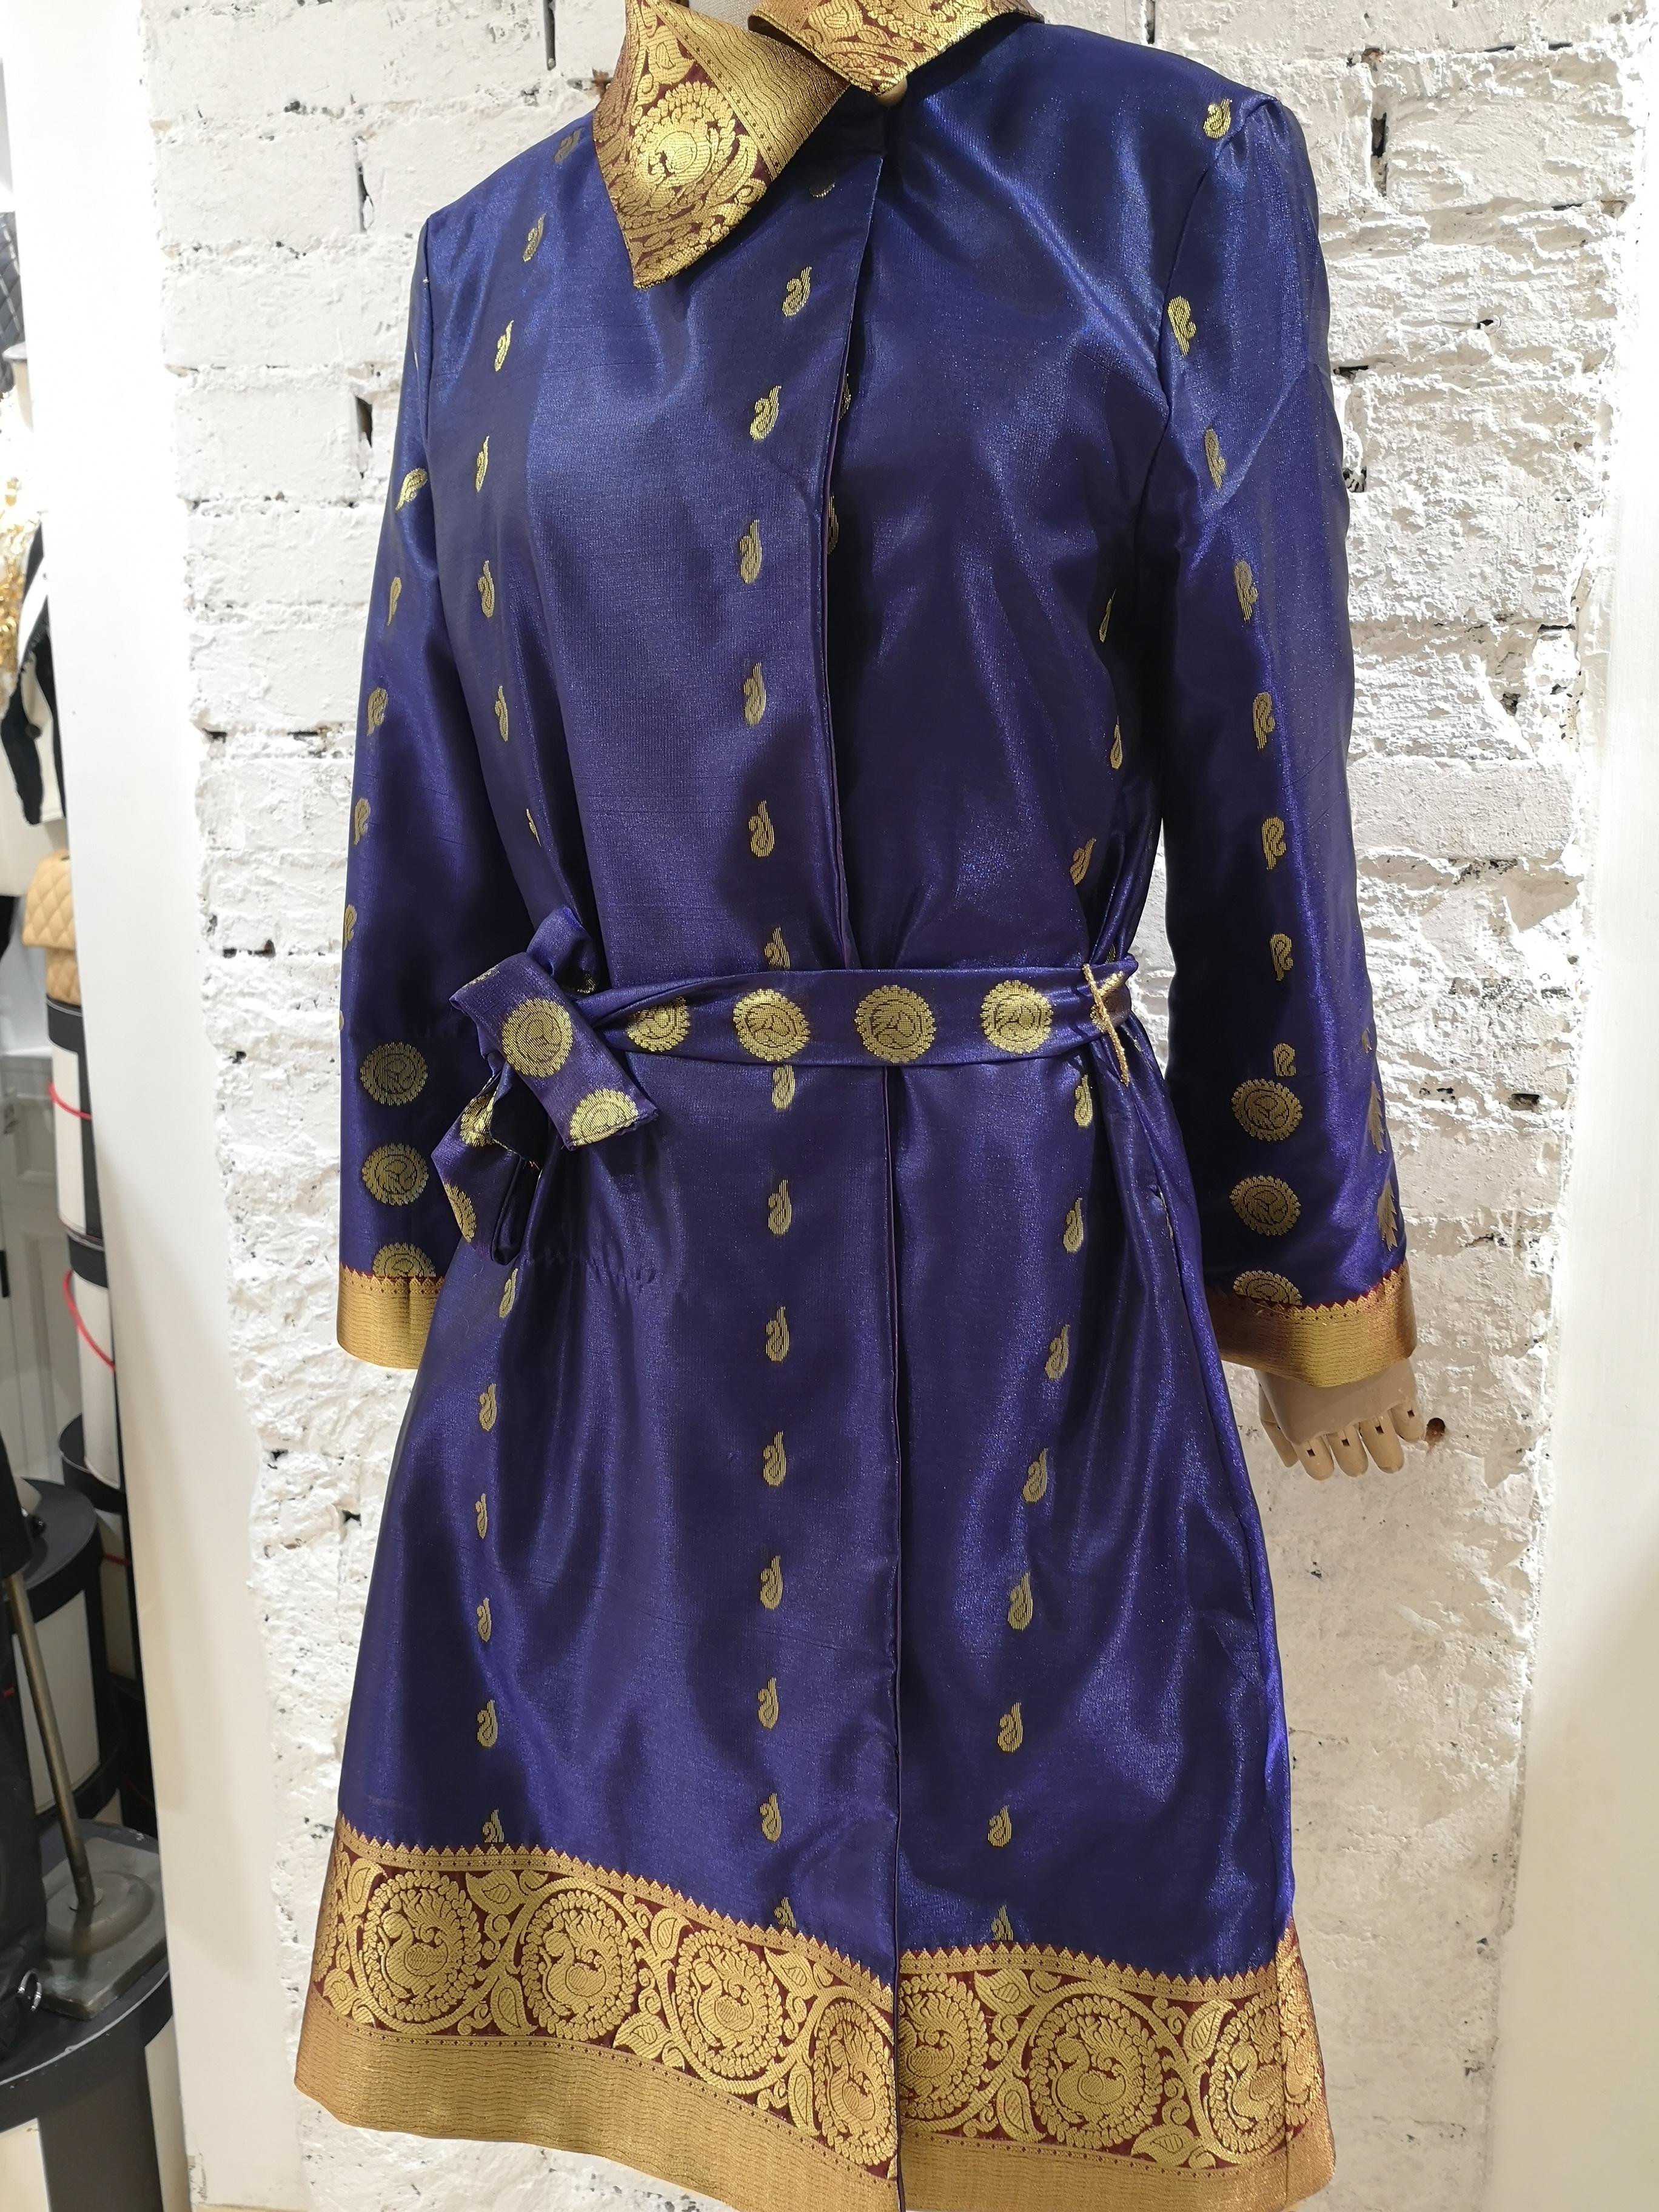 Black Ermetique blue and gold trench coat 